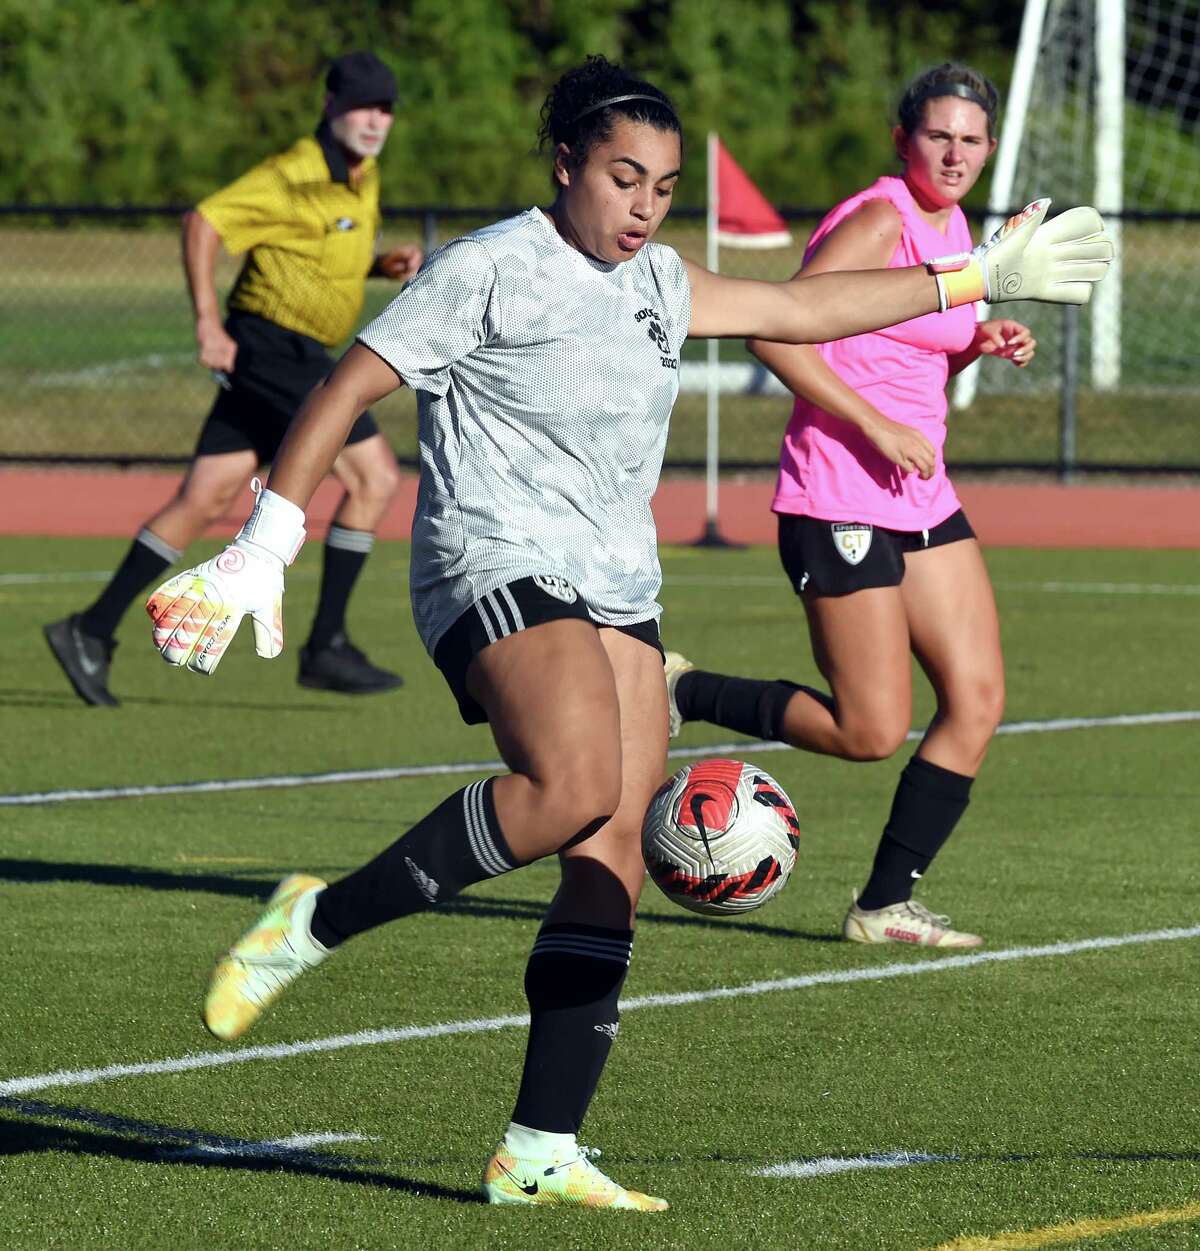 Mercy goalie Melina Ford punts the ball against St. Joseph in a scrimmage in Trumbull on Sepember 1, 2022.